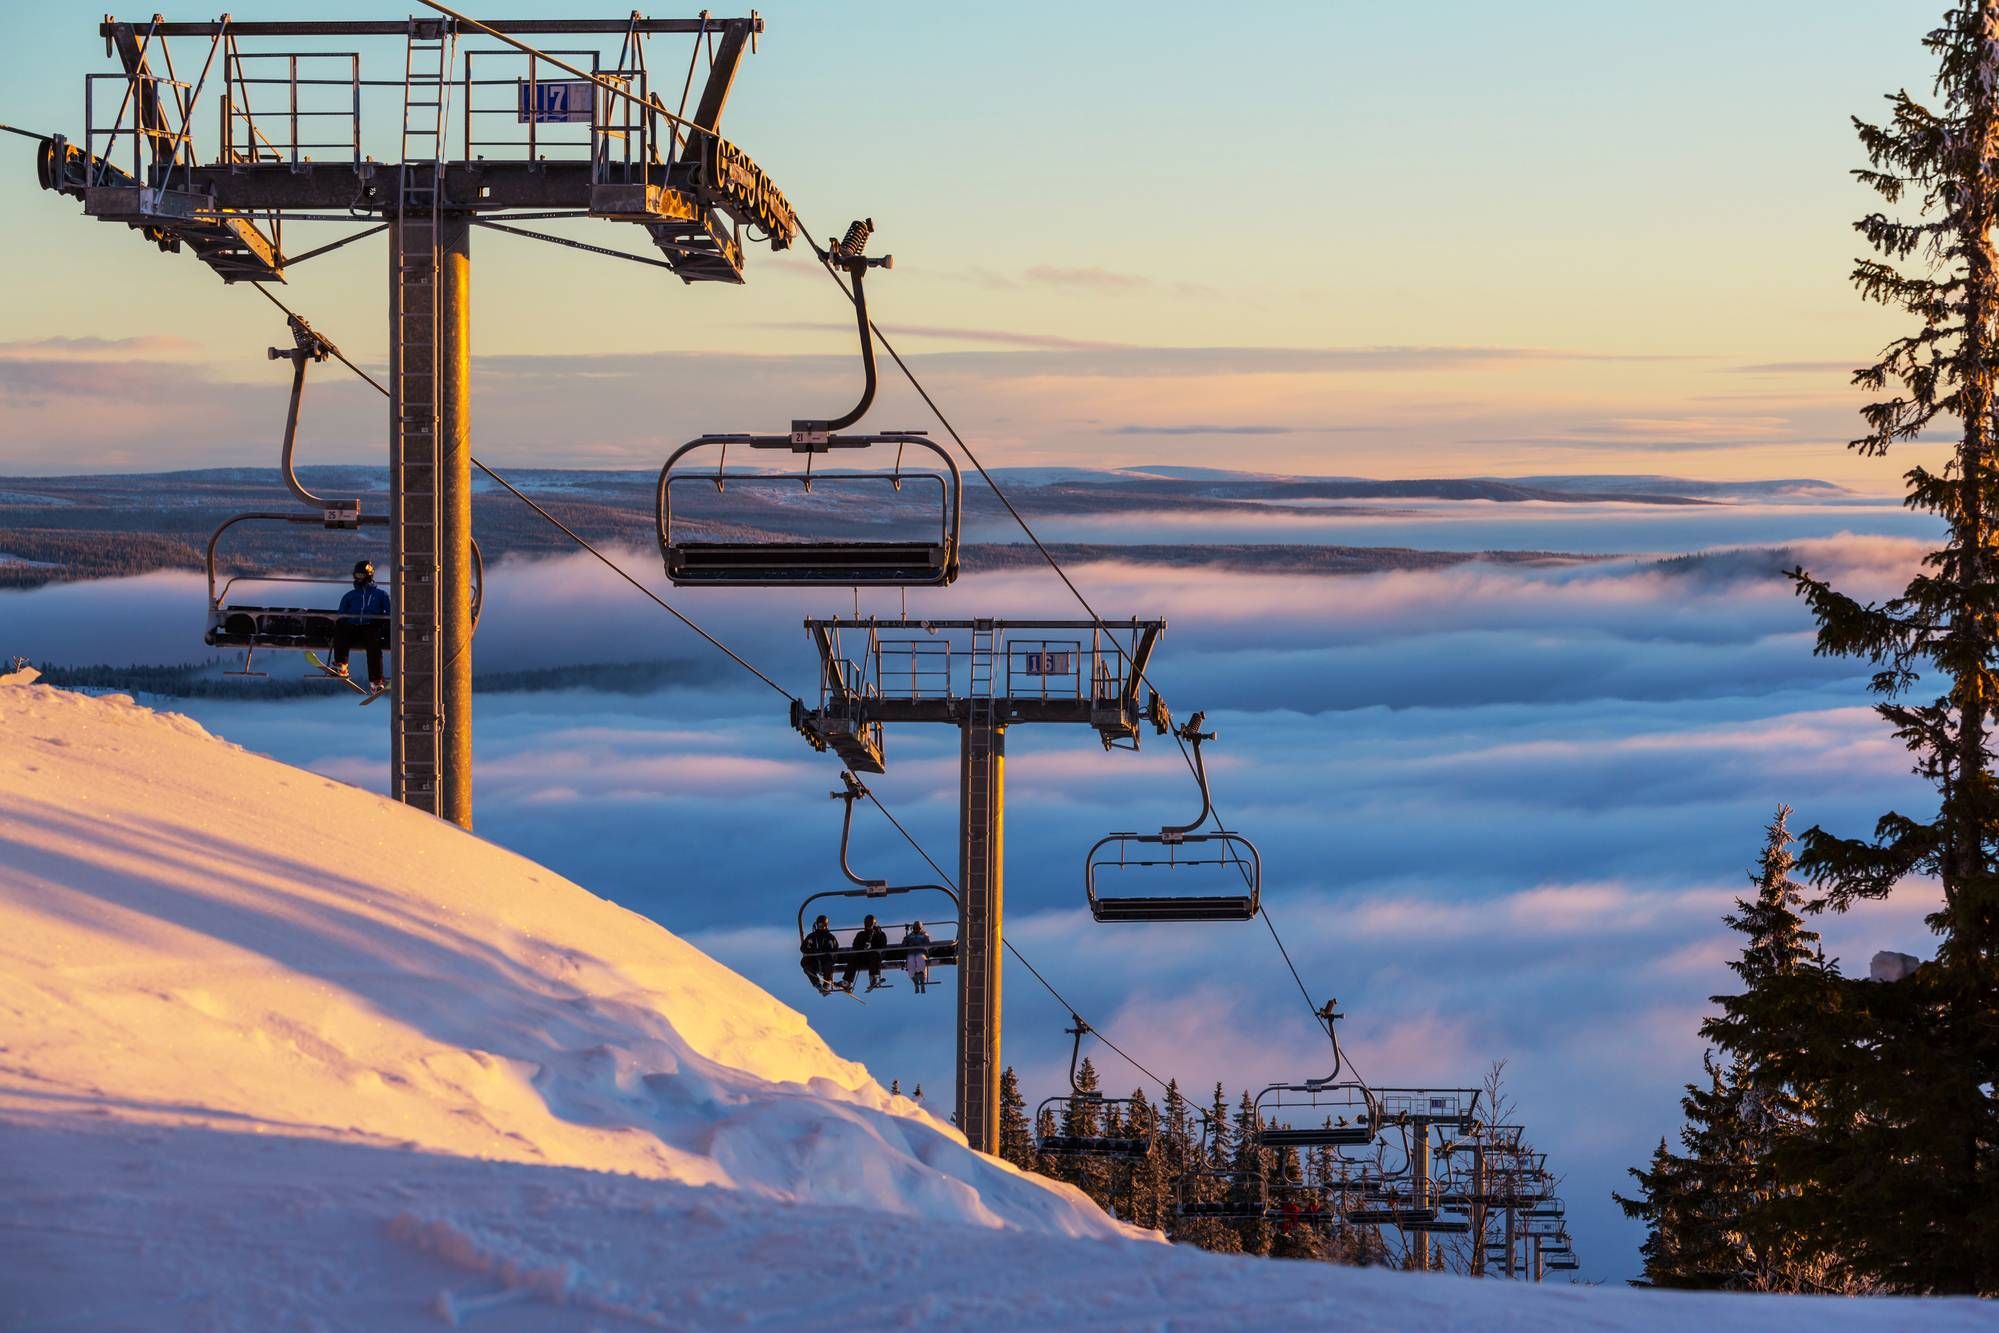 Customers of ski resorts recently asked to have their skier insurance lawsuit conslidated.